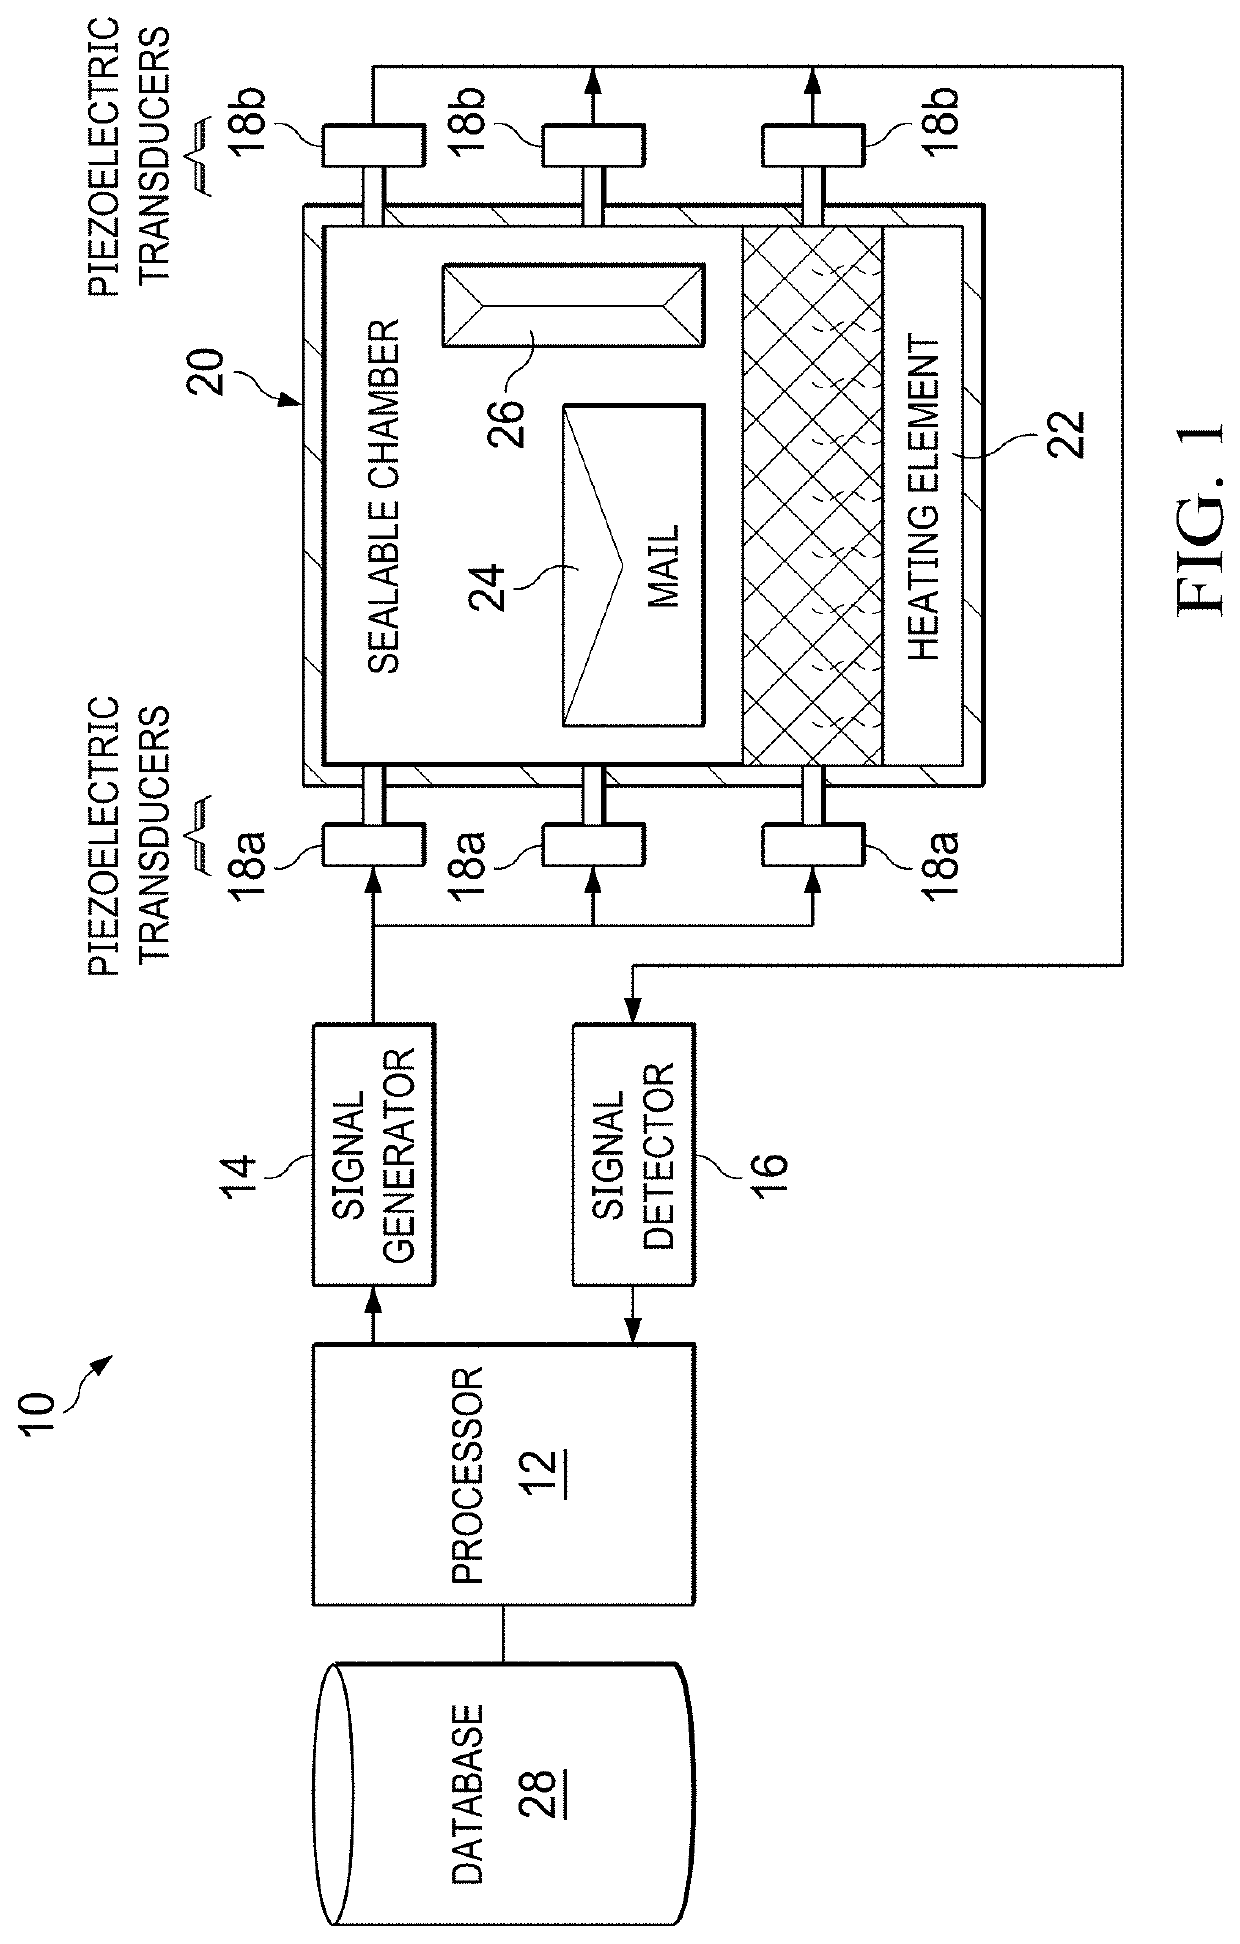 System and method for detecting hidden chemicals within objects in a non-invasive manner